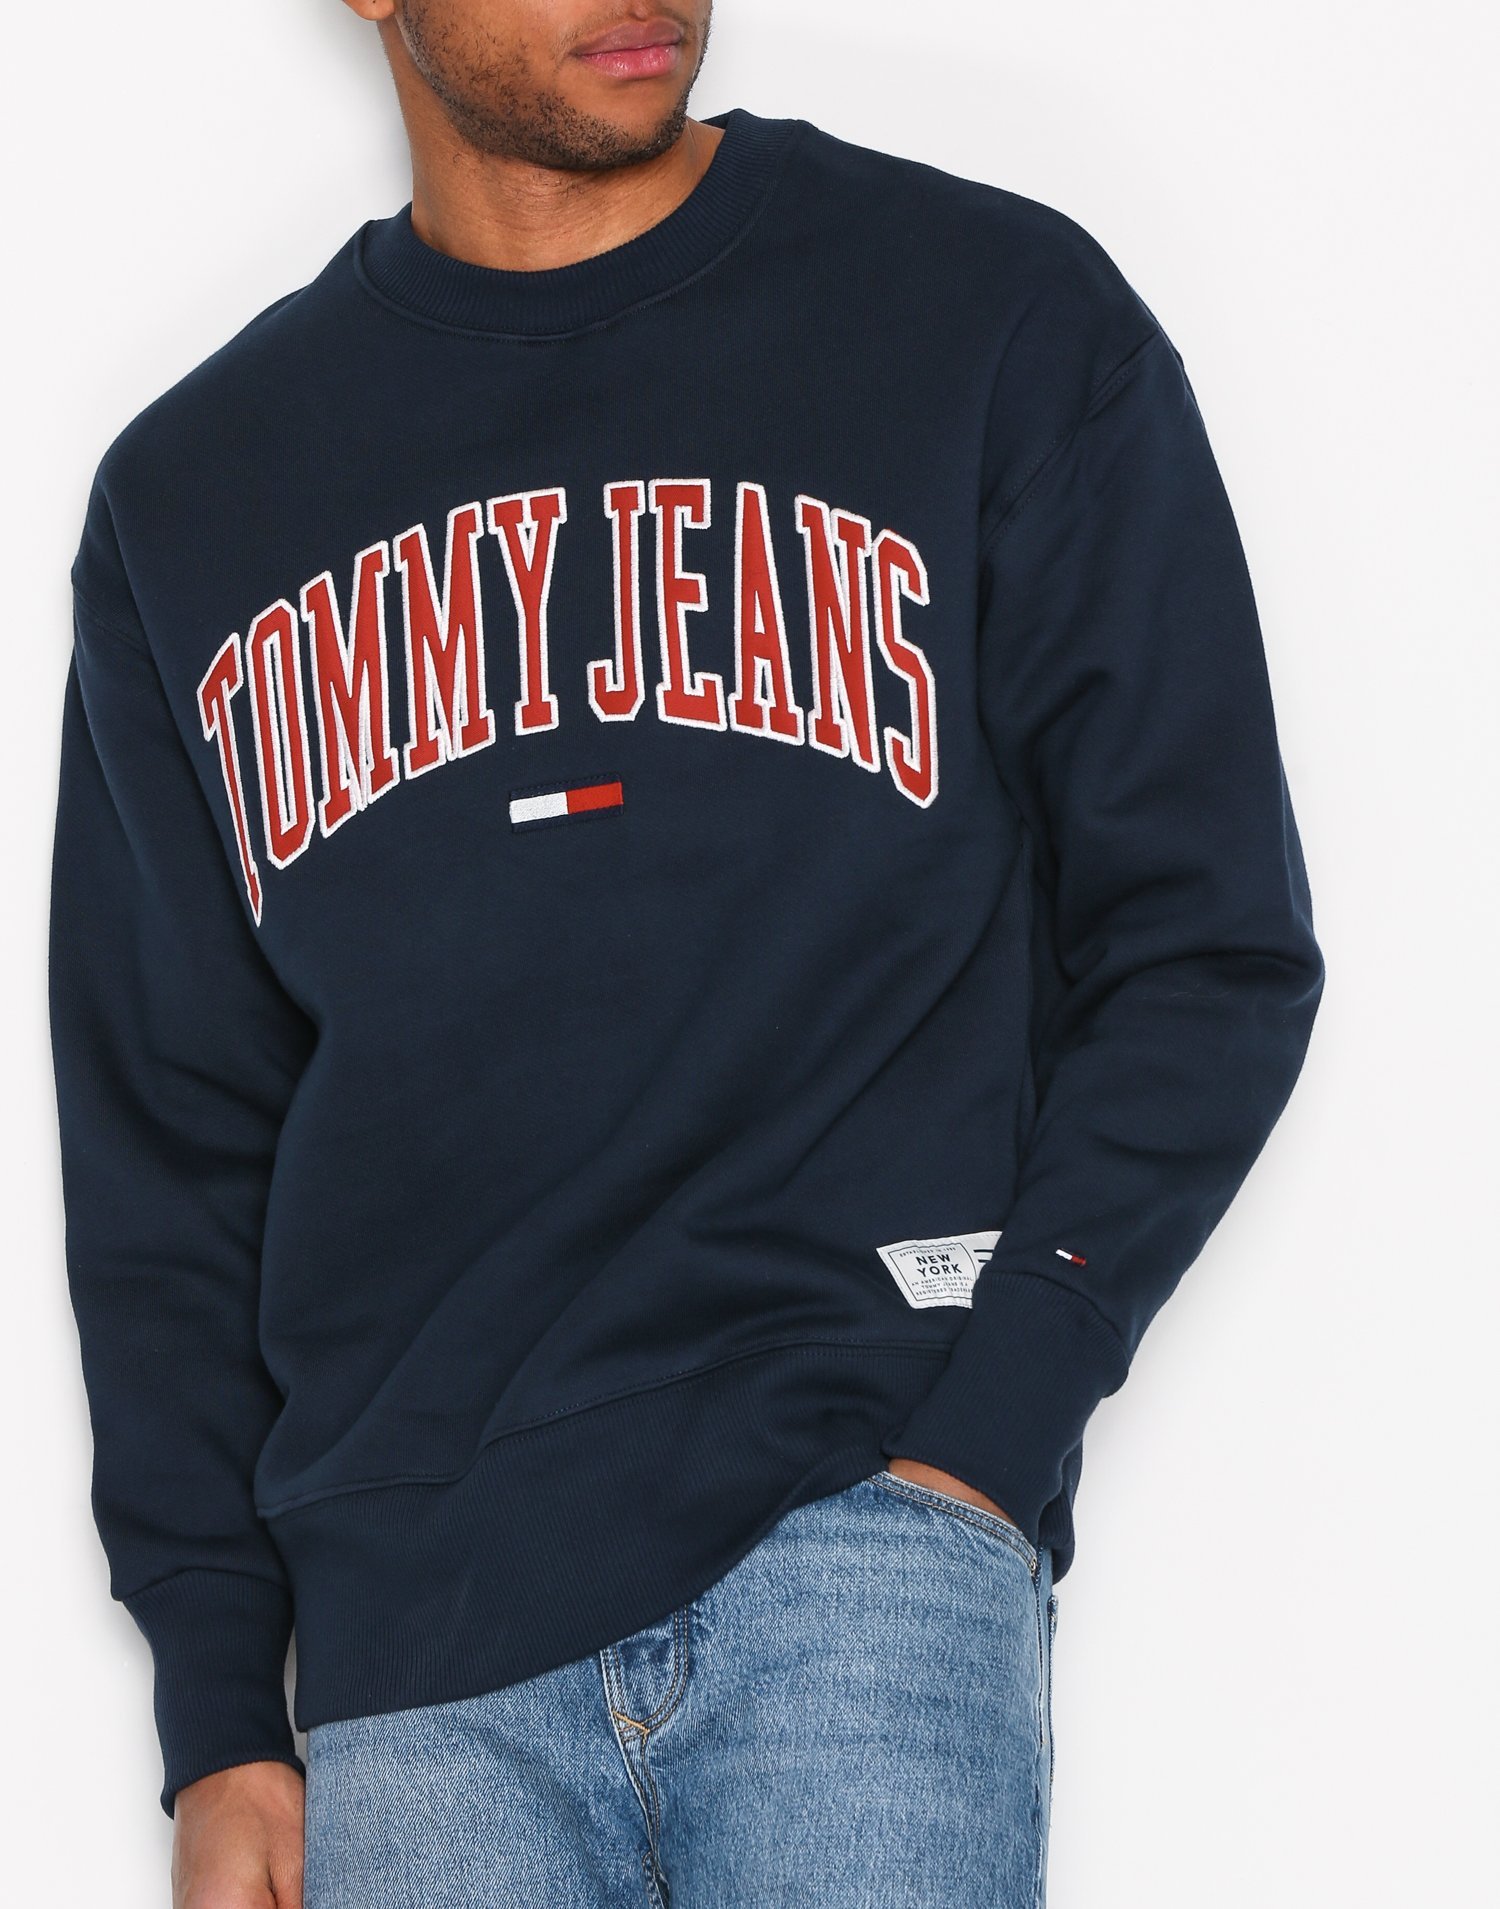 Collegiate Sweat - Tommy Jeans - Navy - Jumpers & Cardigans - Clothing ...